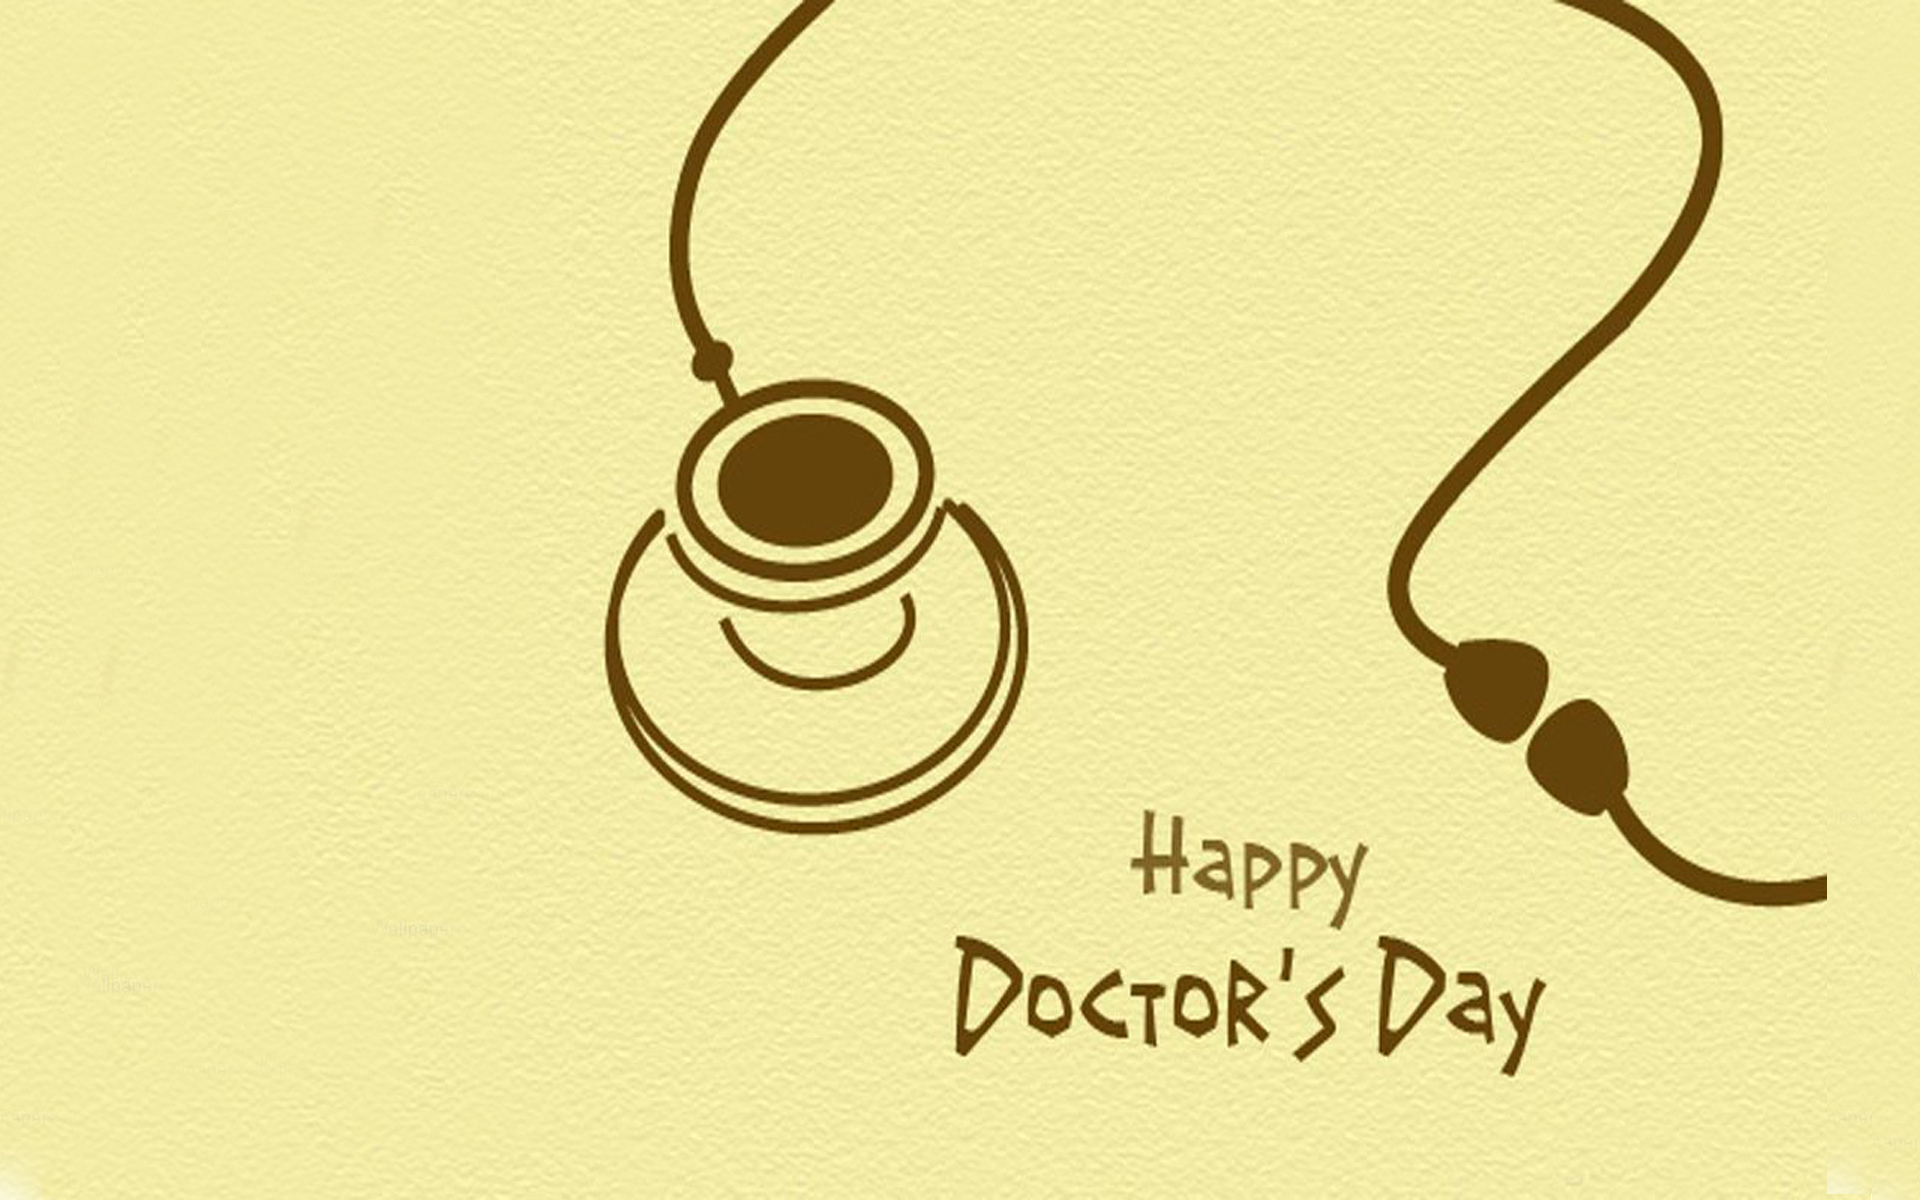 Doctors Day Wishes 2019